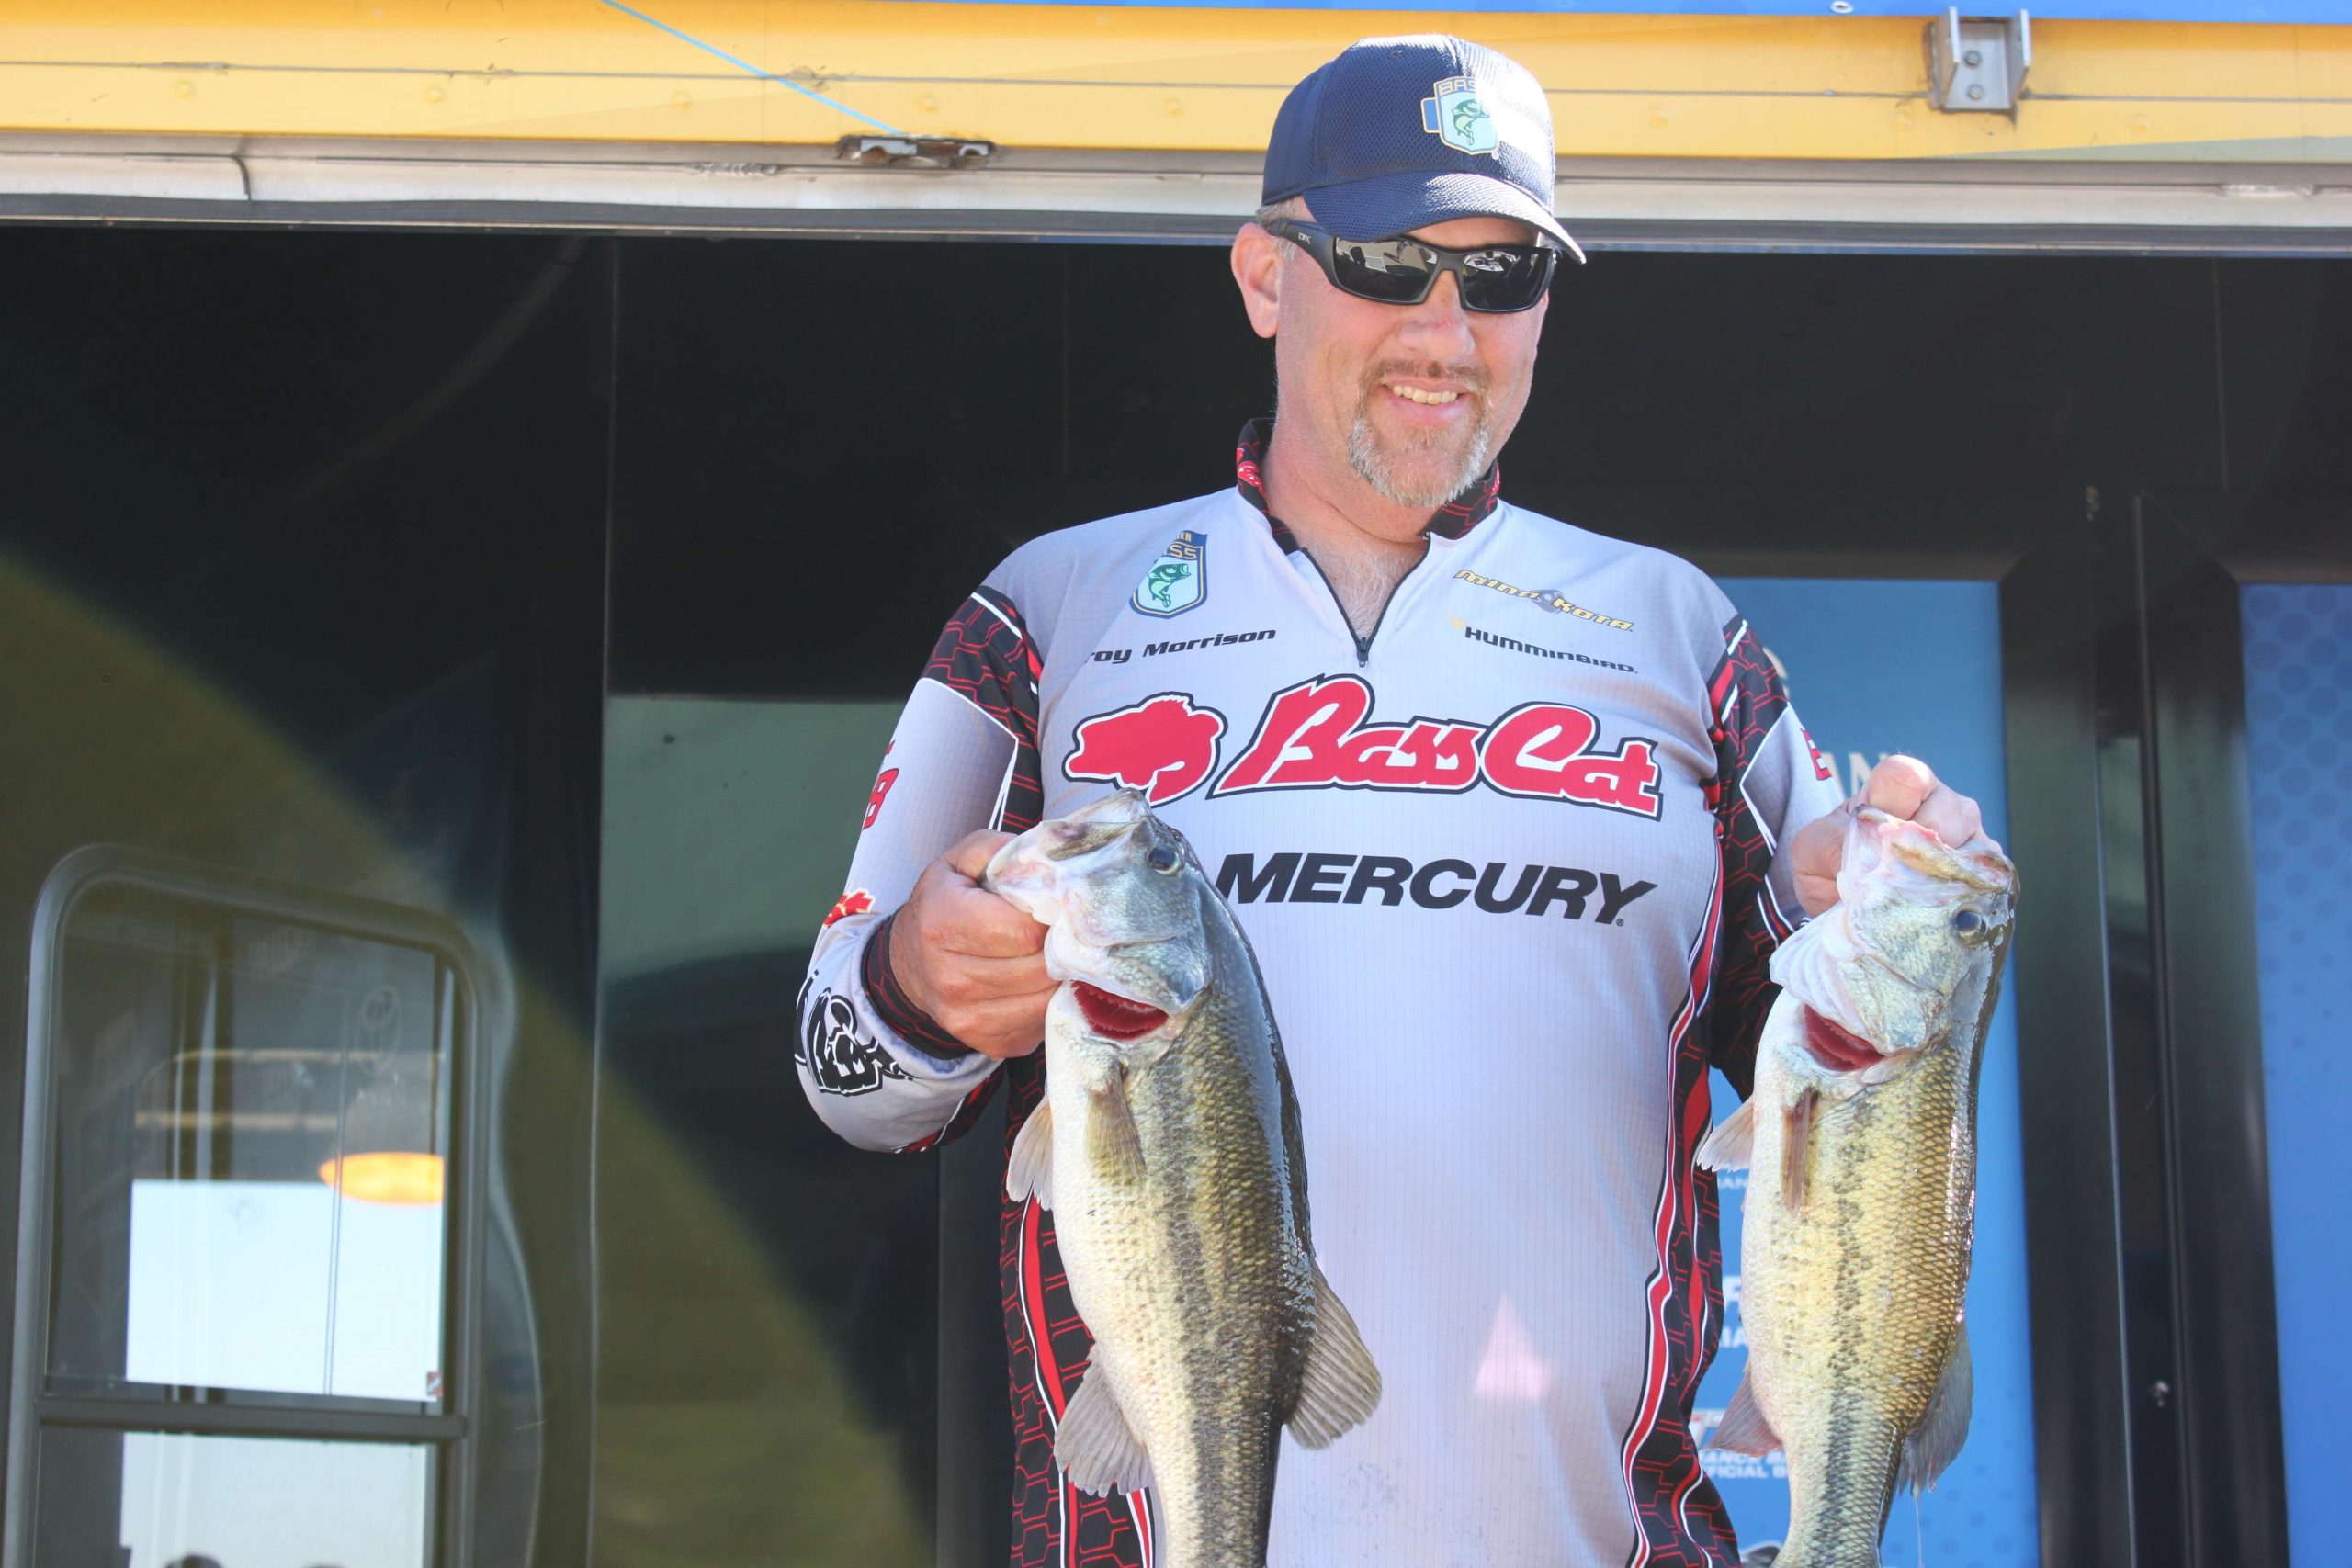 Thereâs Arkansasâ Troy Morrison, whoâs in 12th place with five bass that weighed 16-12.